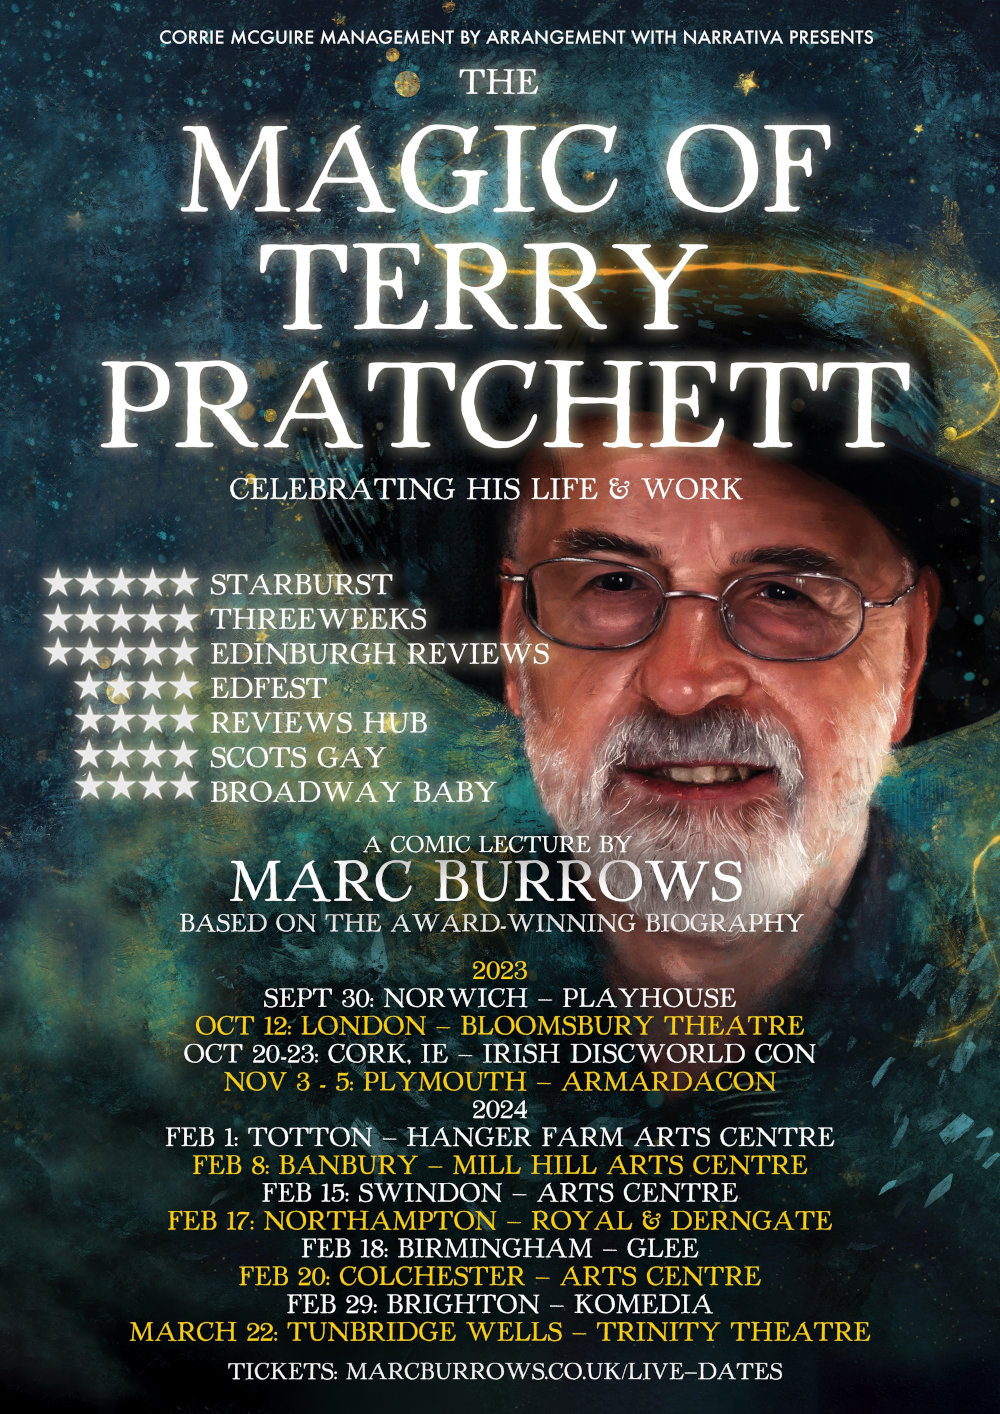 The Magic of Terry Pratchett - A Comic Lecture